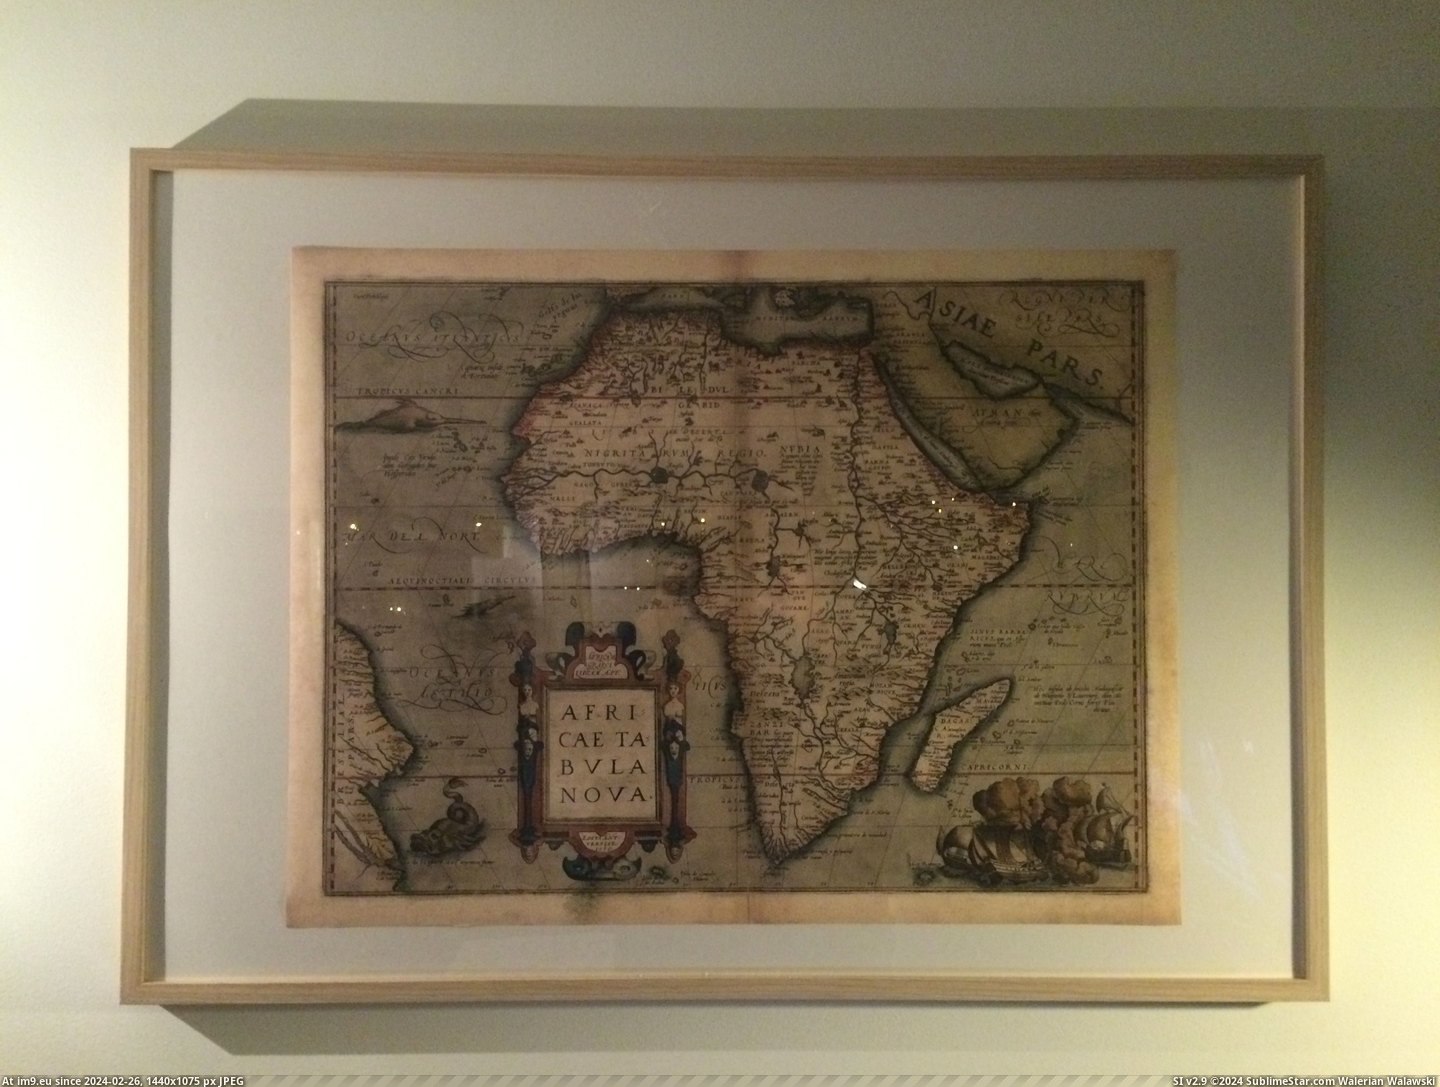 #White #Great #Map #Africa #Received #Replica #Spice #Way #Giant #Wall [Mapporn] Just received a replica of a 1570 map of Africa! Great way to spice up a giant white wall [3264 x 2448] Pic. (Image of album My r/MAPS favs))